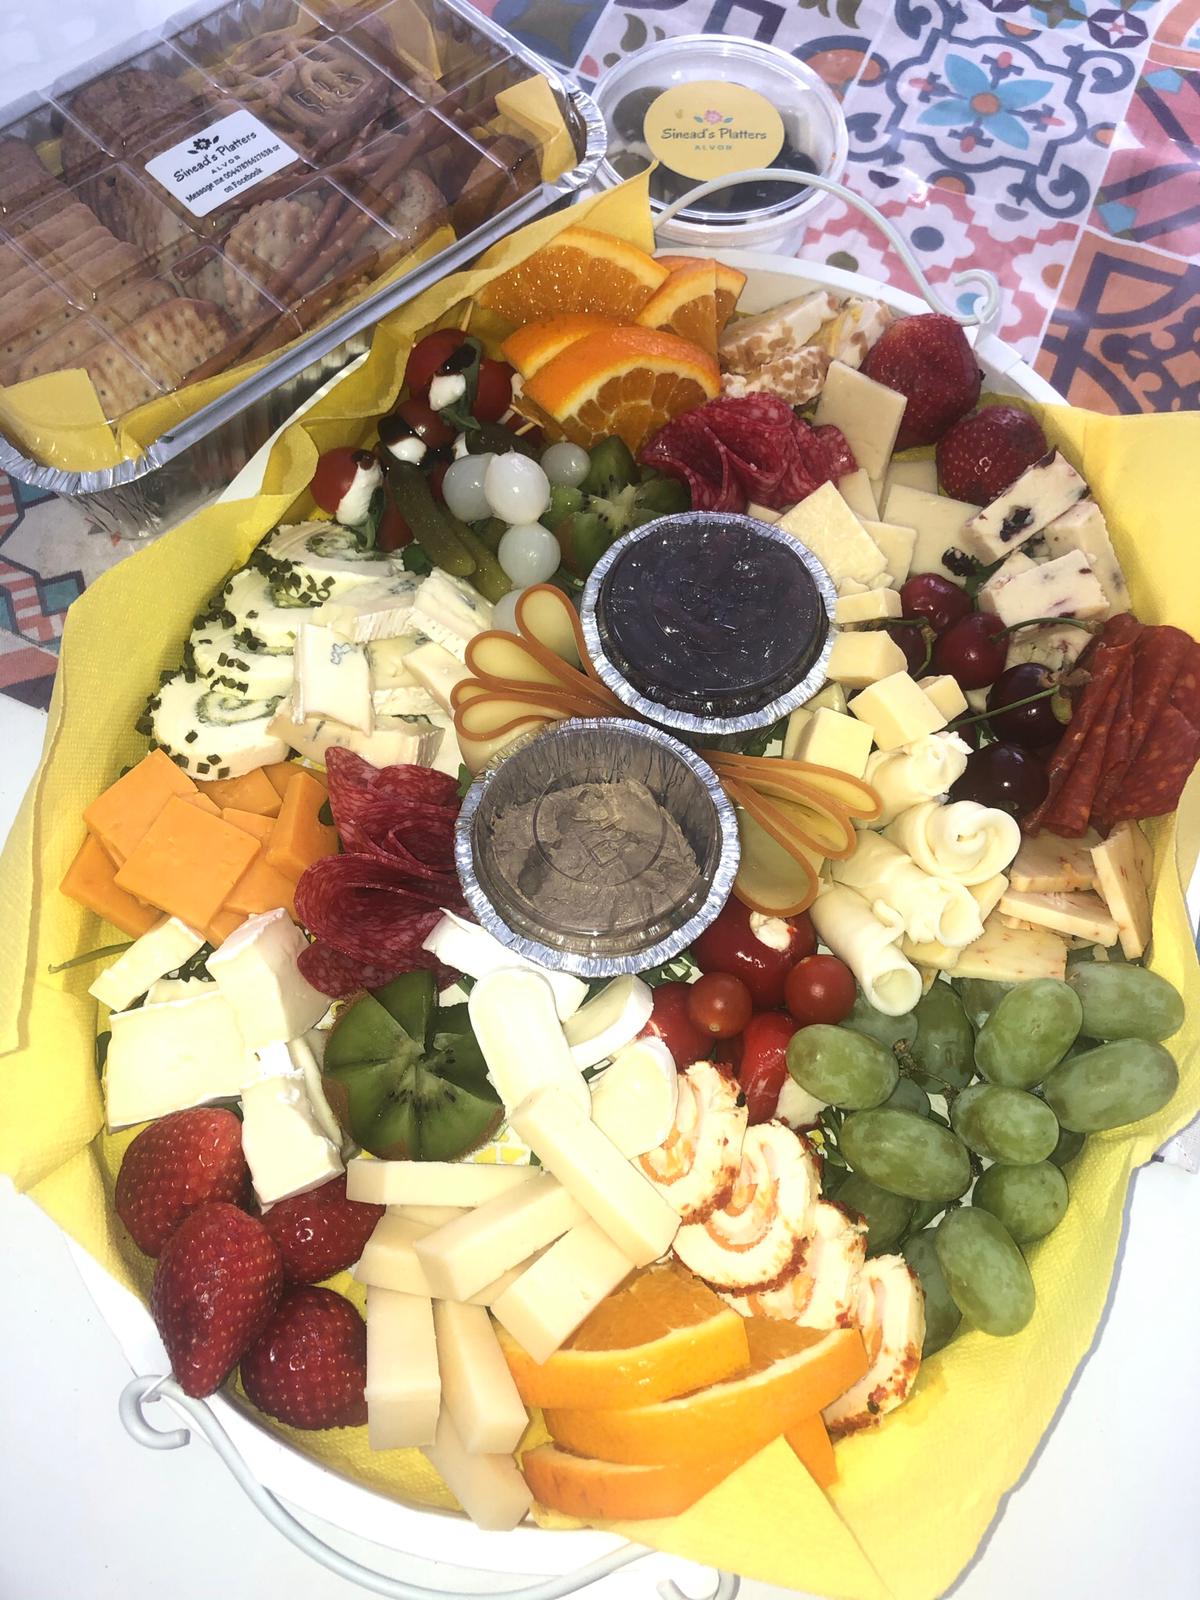 Order a platter with a sellection of fruit, cheeses, salame, toasts, etc.) 15 euros per person